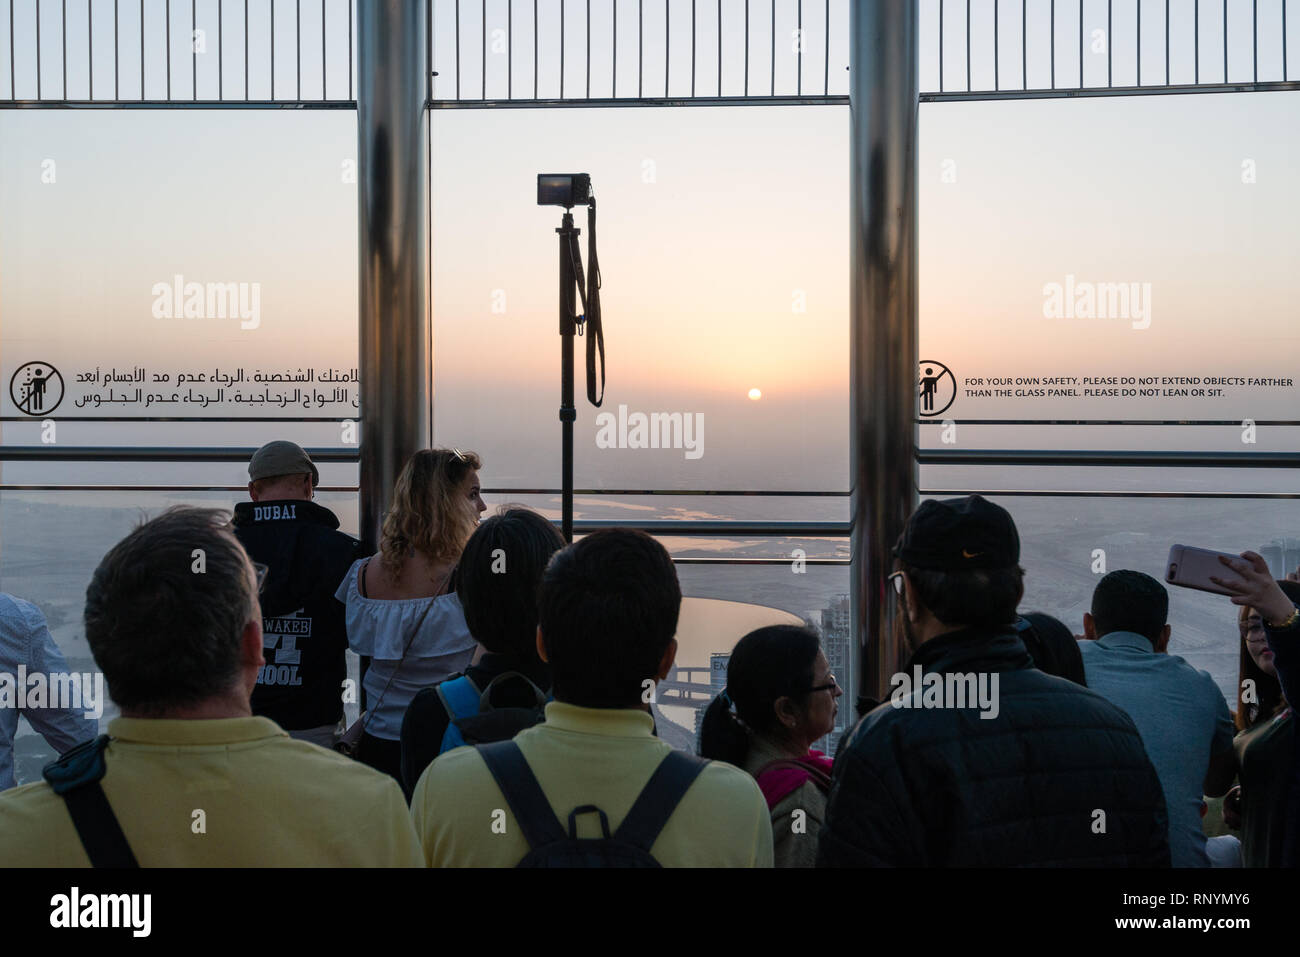 DUBAI, UAE - February 17, 2018: Tourists look at sunrise at the observation deck at the top of Burj Khalifa - highest building in the world, United Ar Stock Photo